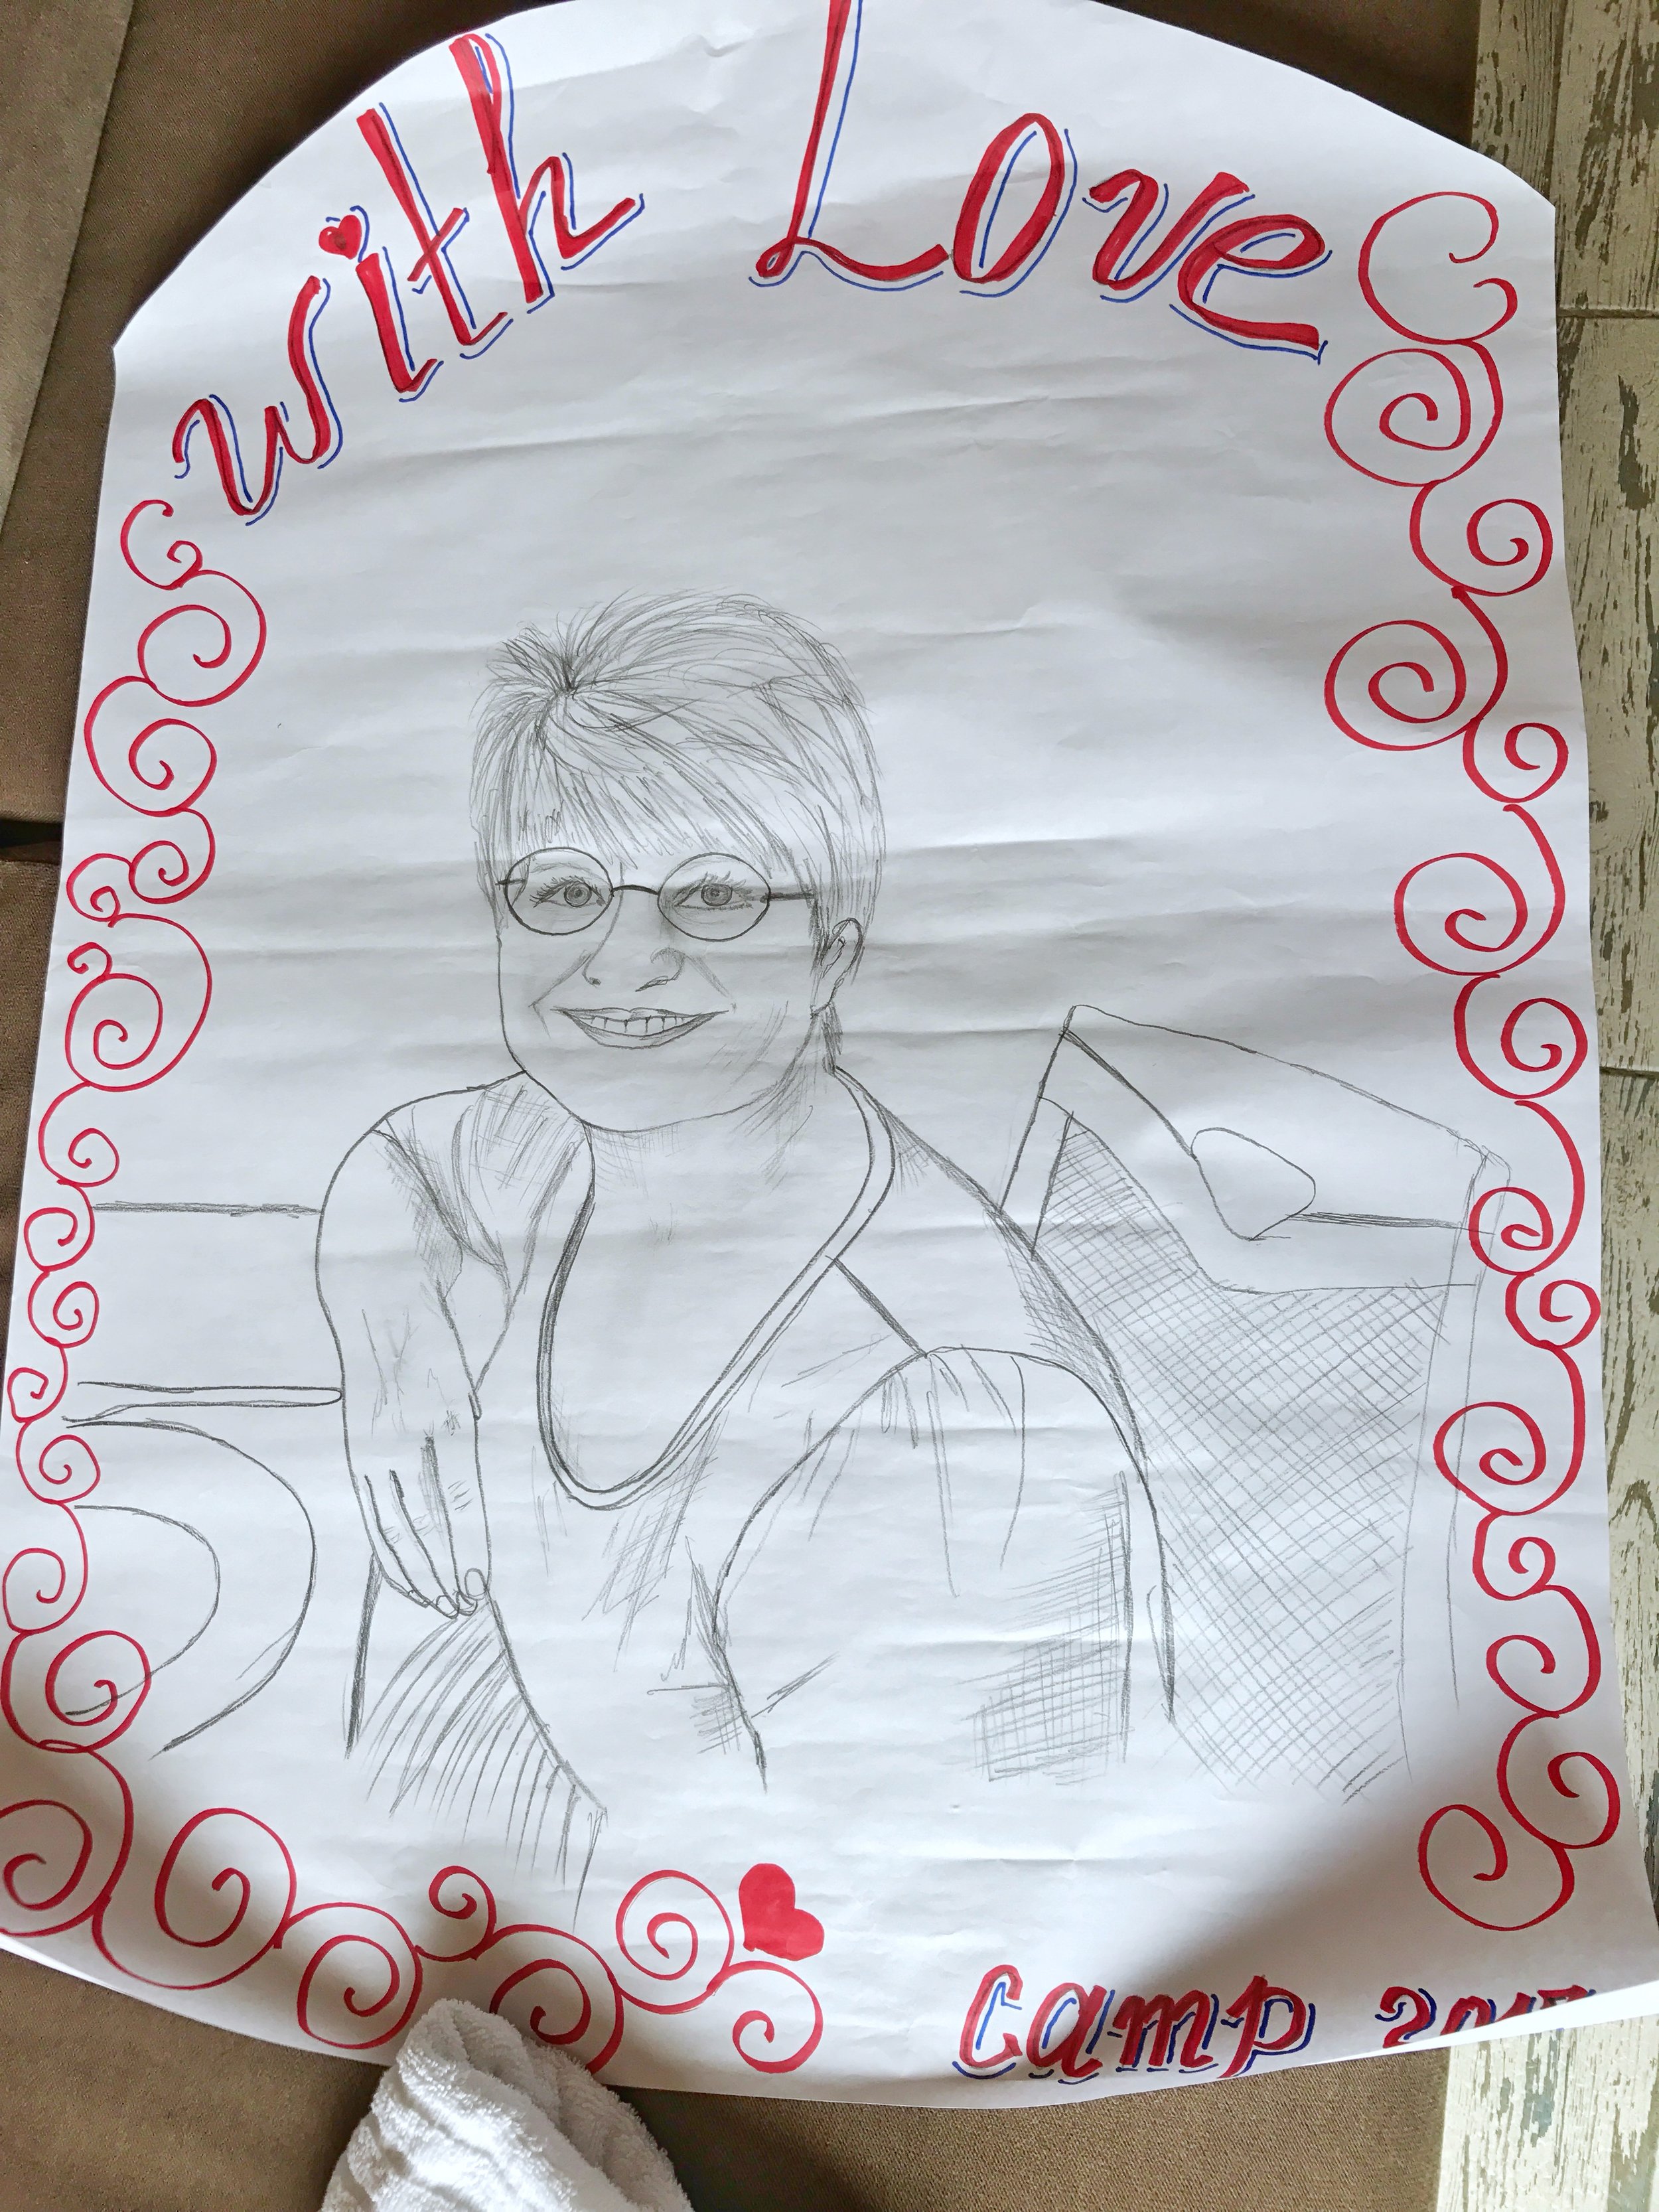  The ladies presented us with gifts.....and one talented young lady even drew our portraits on a large poster. Wow! 